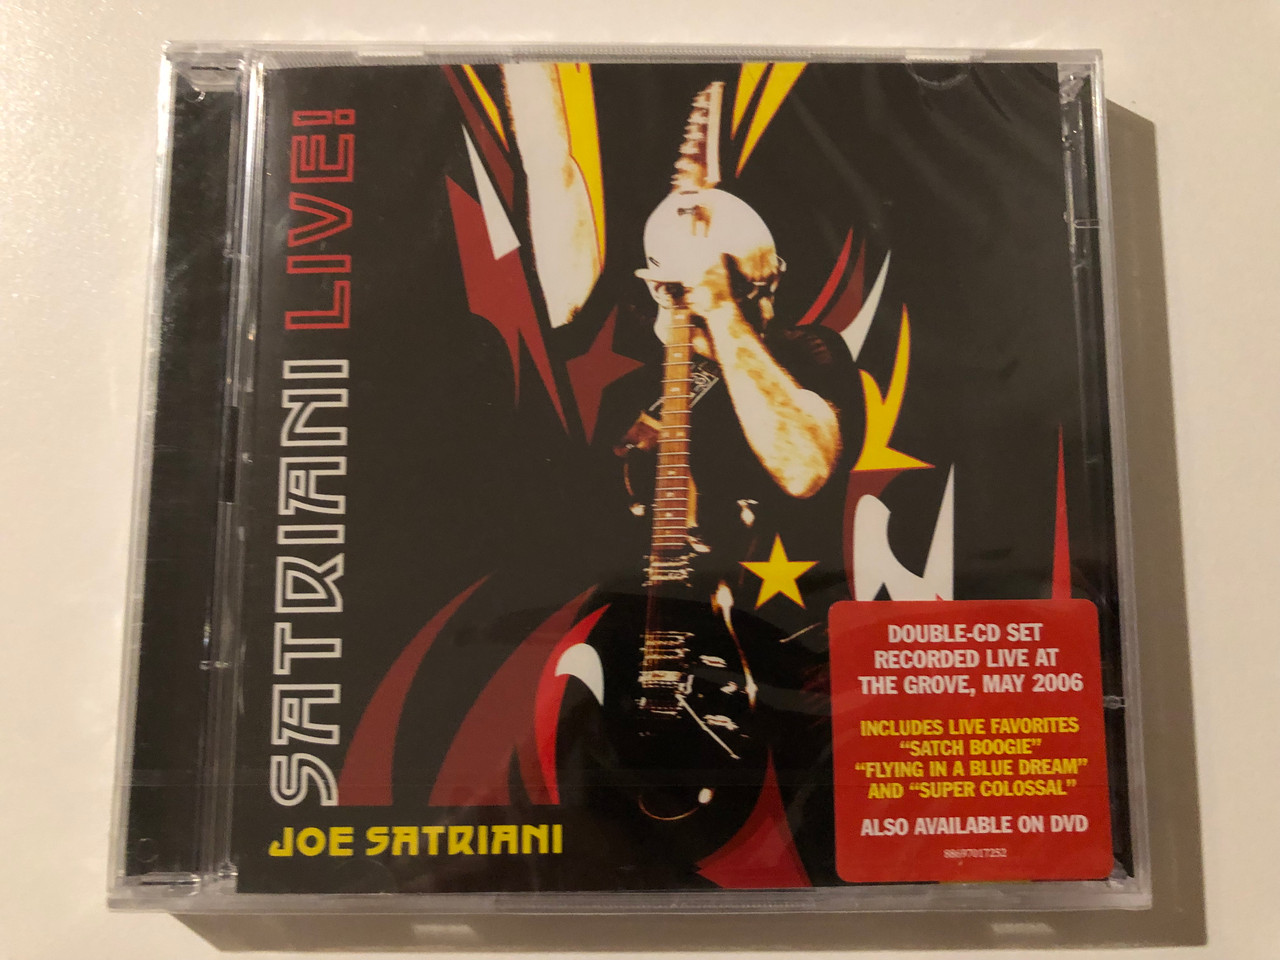 https://cdn10.bigcommerce.com/s-62bdpkt7pb/products/0/images/247600/Joe_Satriani_Satriani_Live_Double-CD_Set_Recorded_Live_At_The_Grove_May_2006_Includes_Live_Favorites_Satch_Boogie_Flying_In_A_Blue_Dream_And_Super_Colossal_Also_Available_1__12598.1660211143.1280.1280.JPG?c=2&_gl=1*st4no*_ga*MjA2NTIxMjE2MC4xNTkwNTEyNTMy*_ga_WS2VZYPC6G*MTY2MDE5OTQ4NC41MjQuMS4xNjYwMjA5NjA5LjQ0